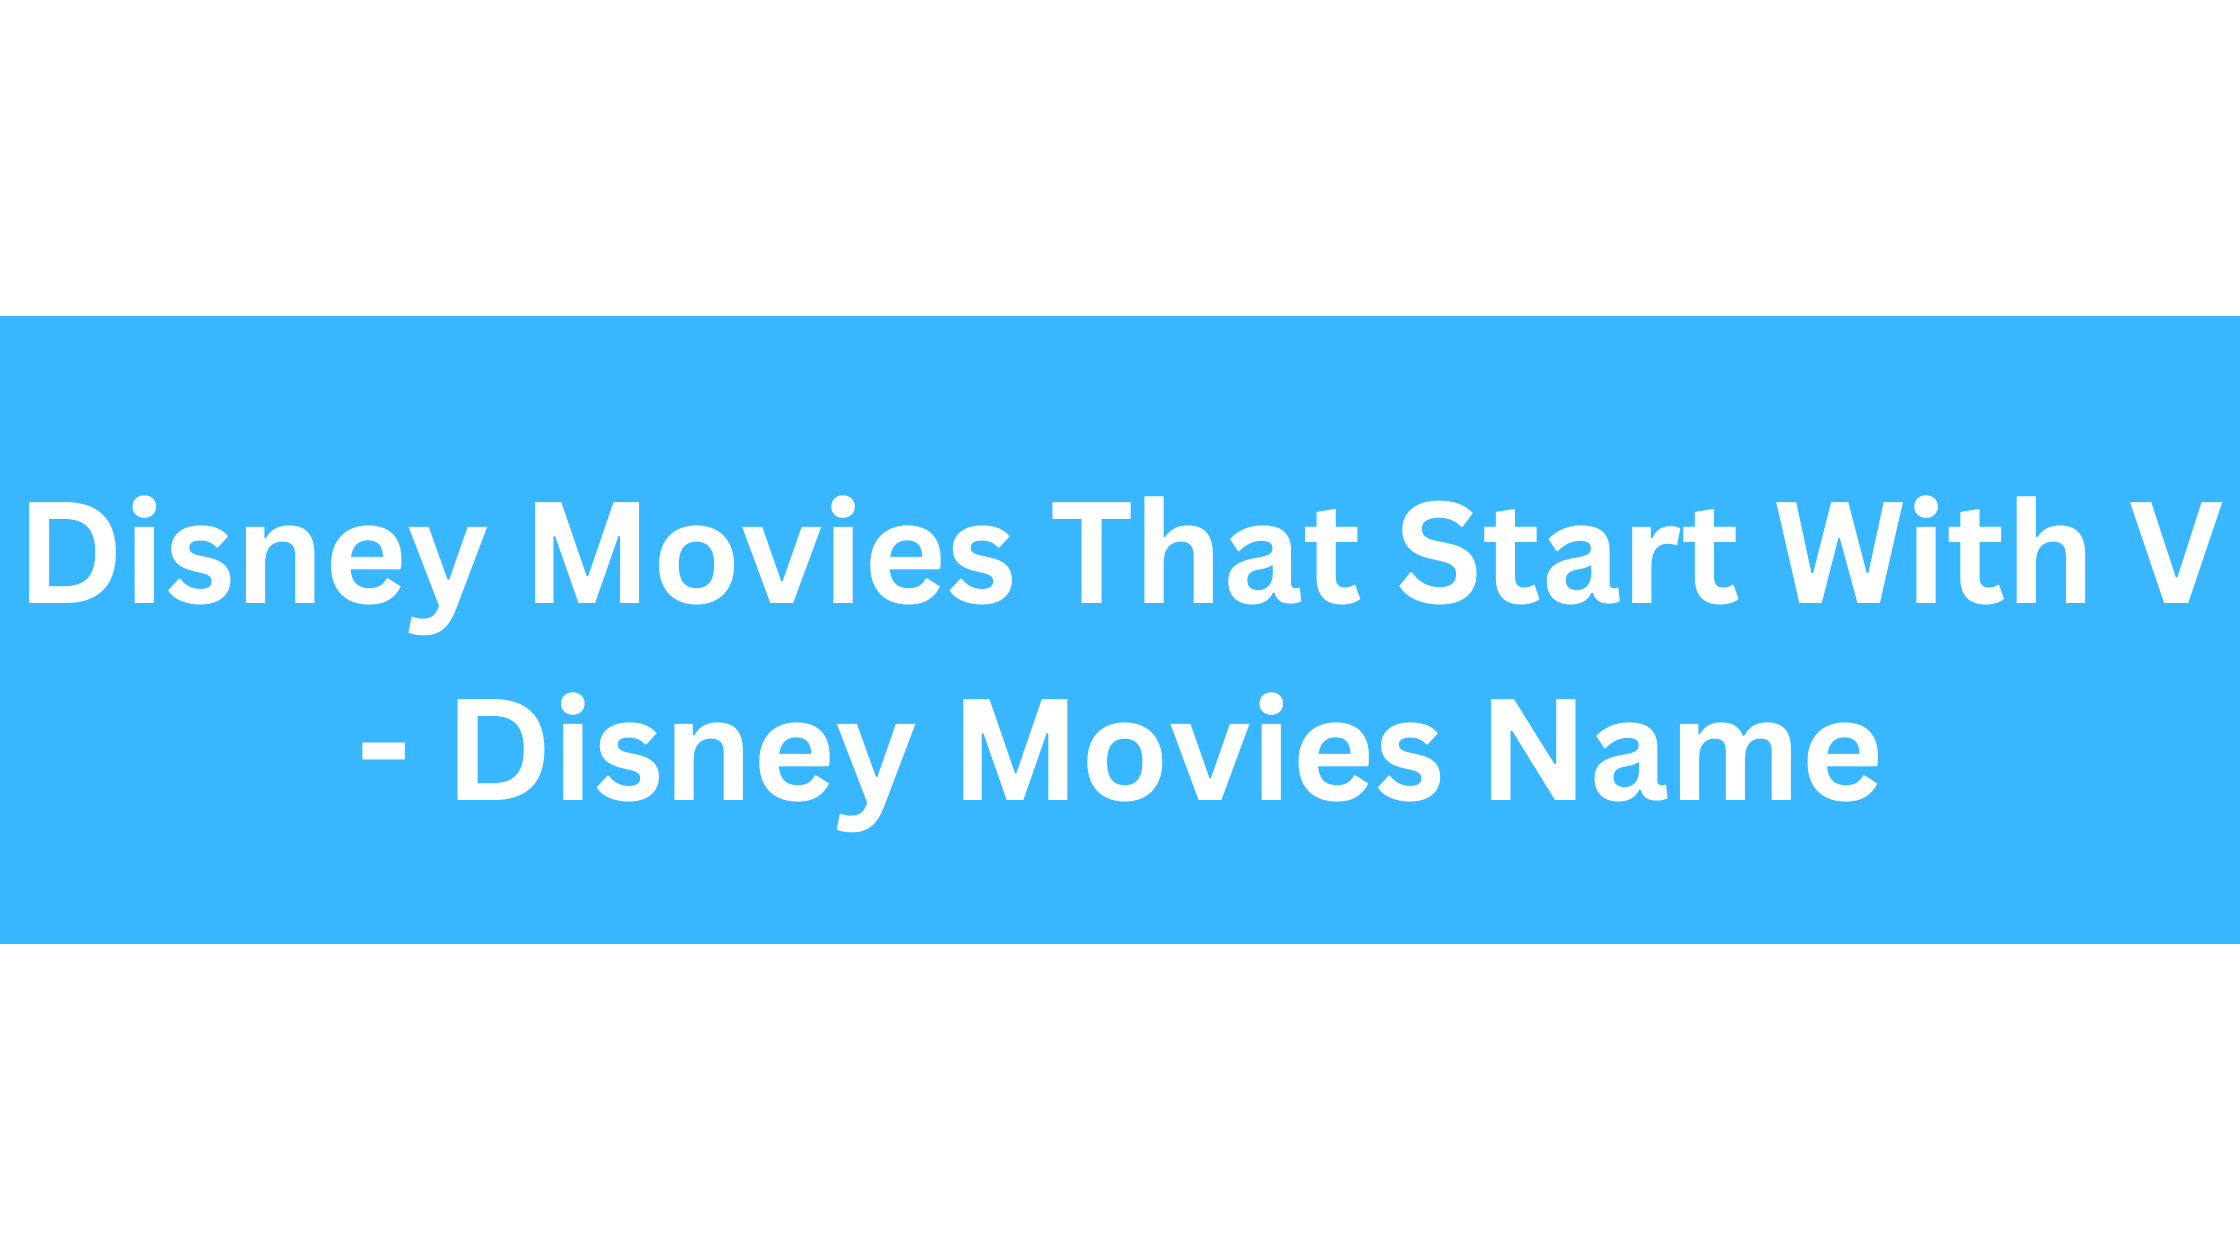 Disney Movies That Start With V